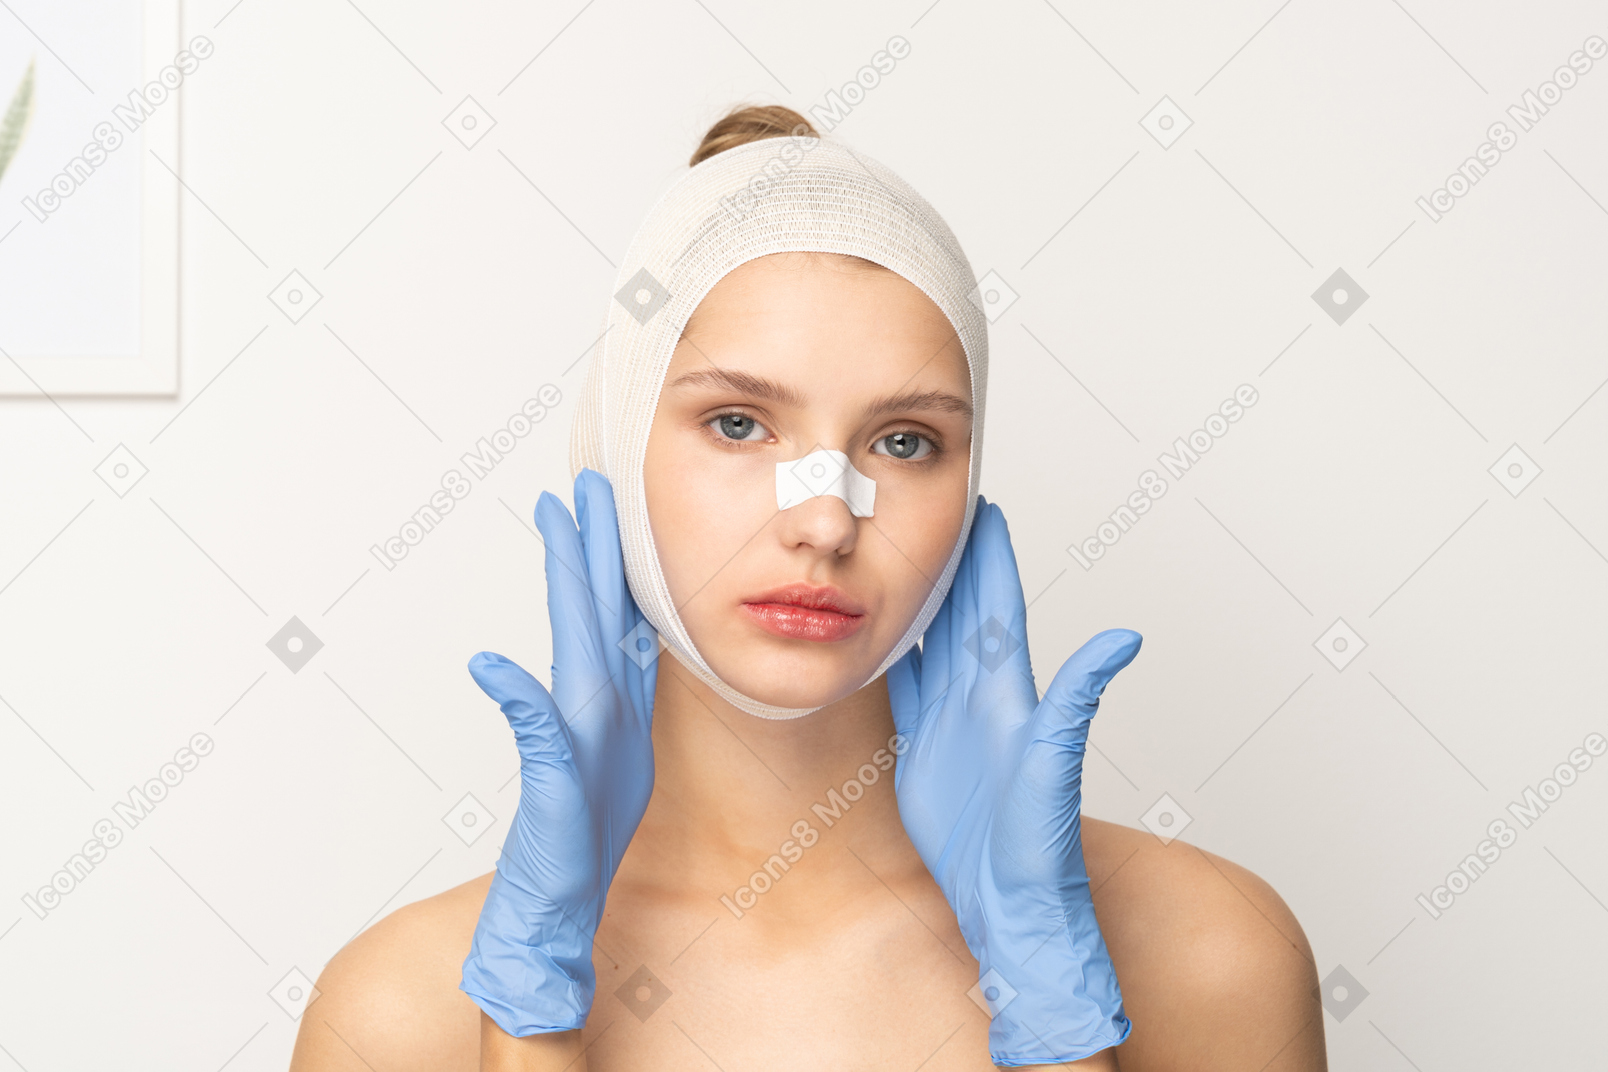 Female patient with hands holding her face